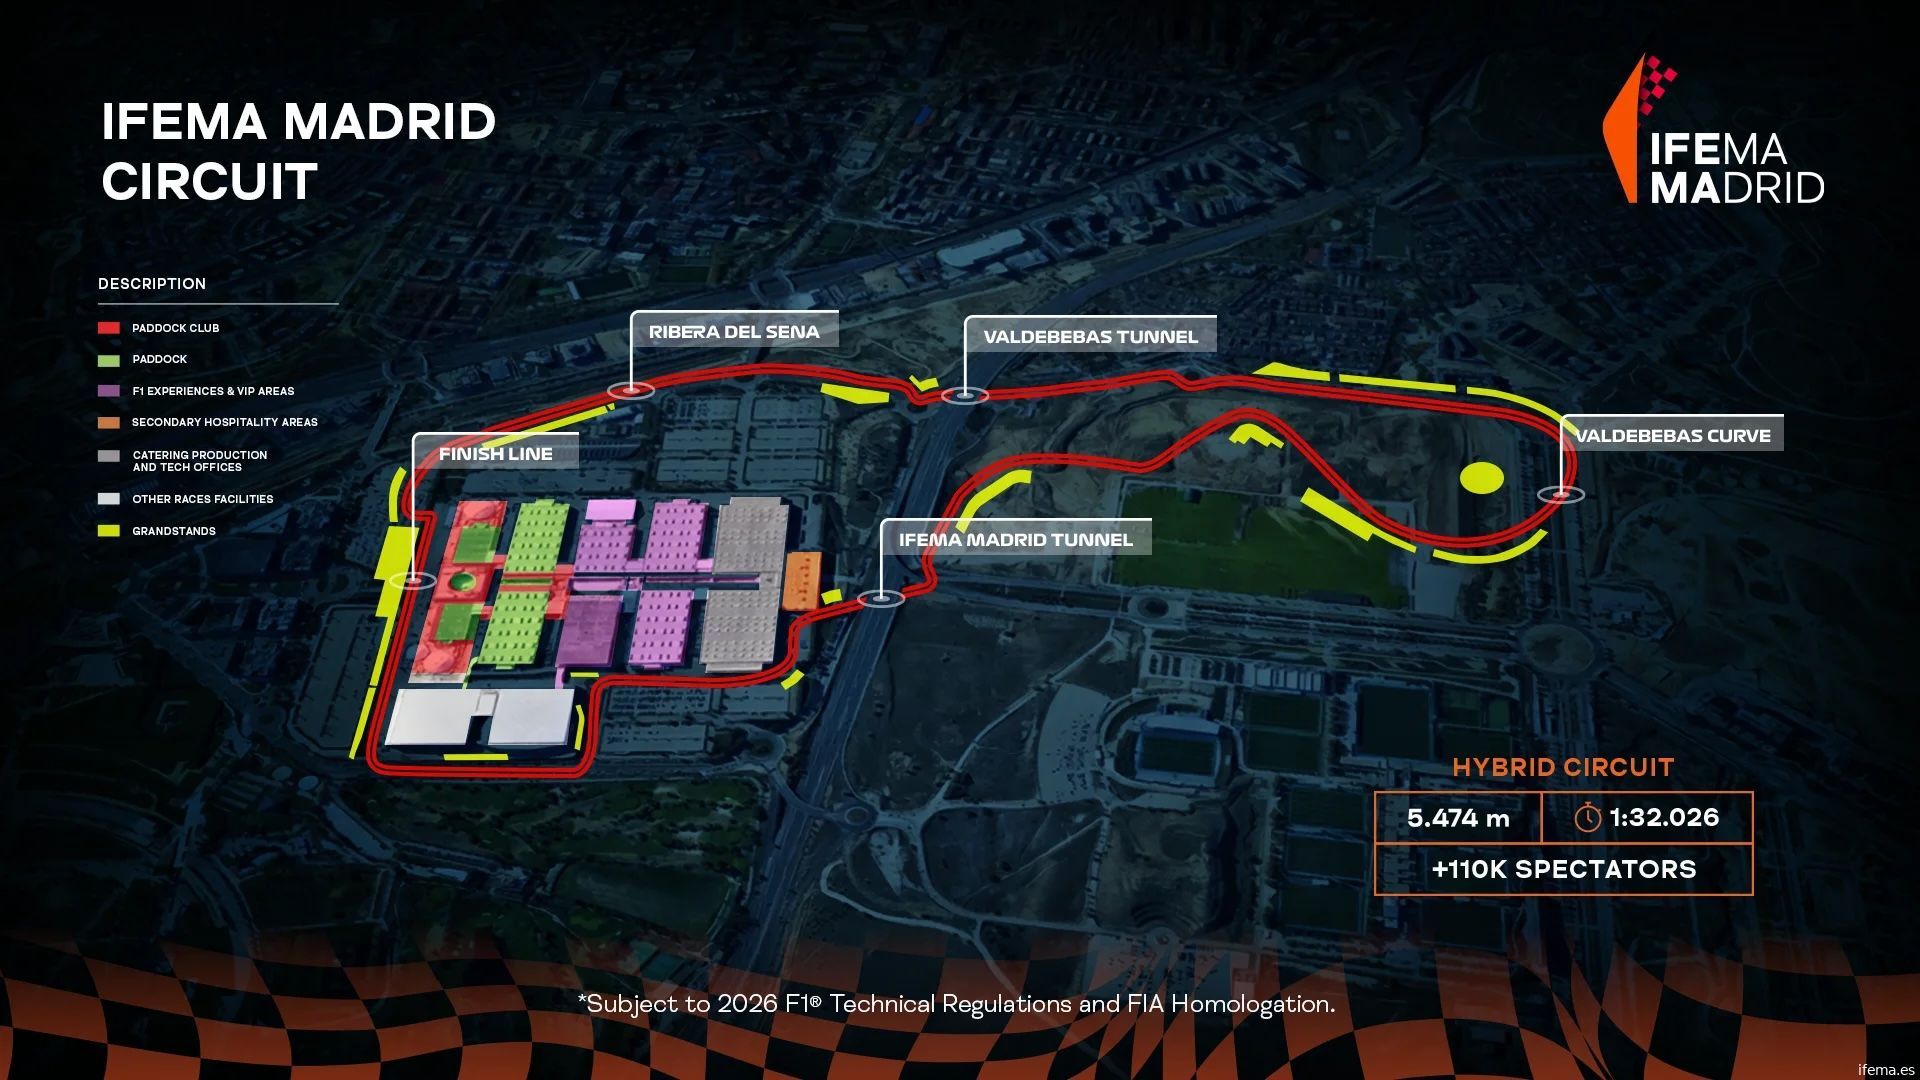 The proposed layout of the Madrid Circuit shared on ifema.es/en/f1